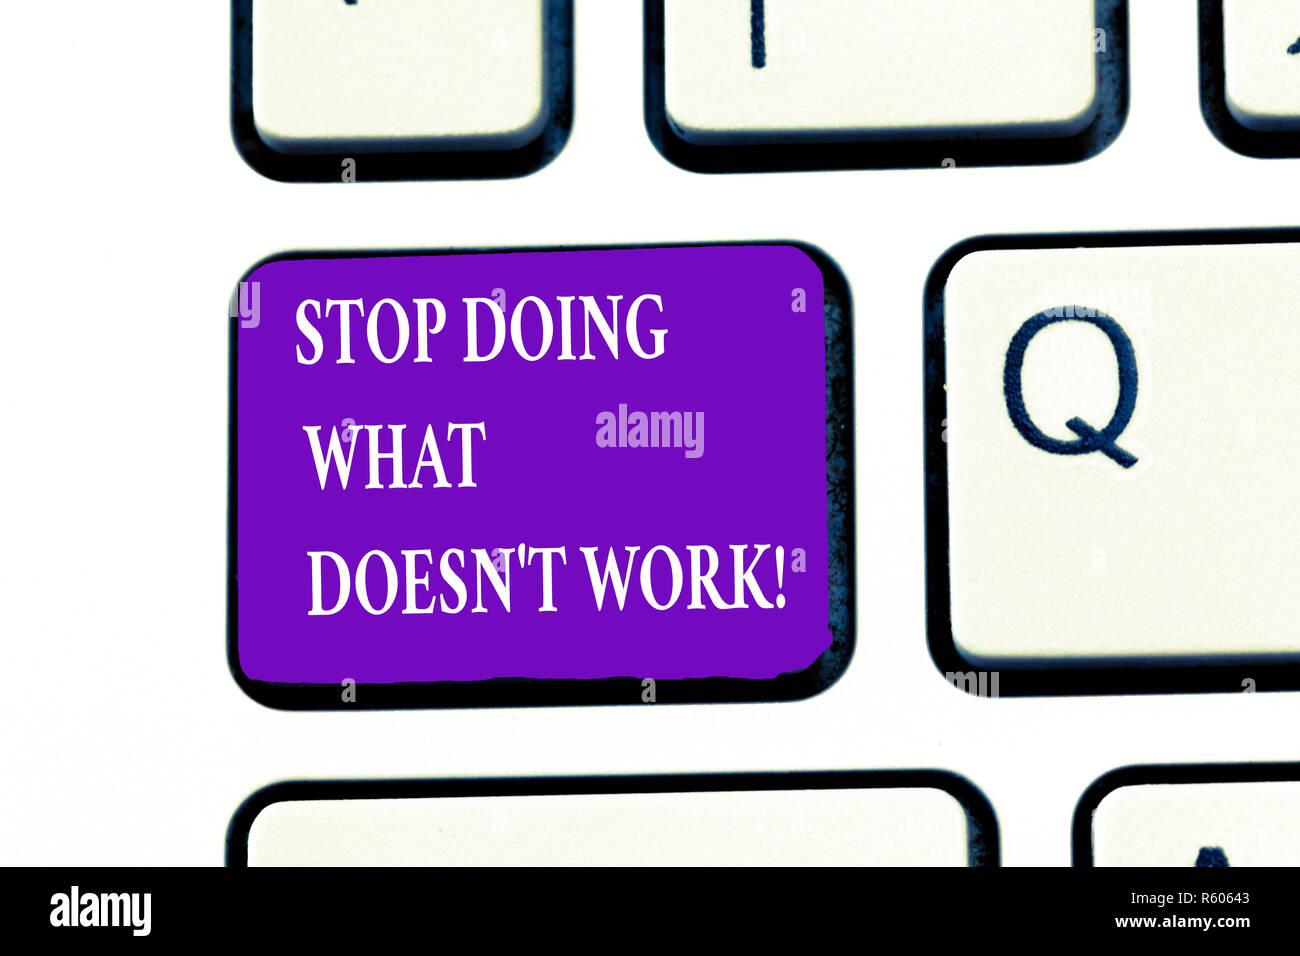 Word writing text Stop Doing What Doesn t not Work. Business concept for busy does not always mean being Productive. Stock Photo